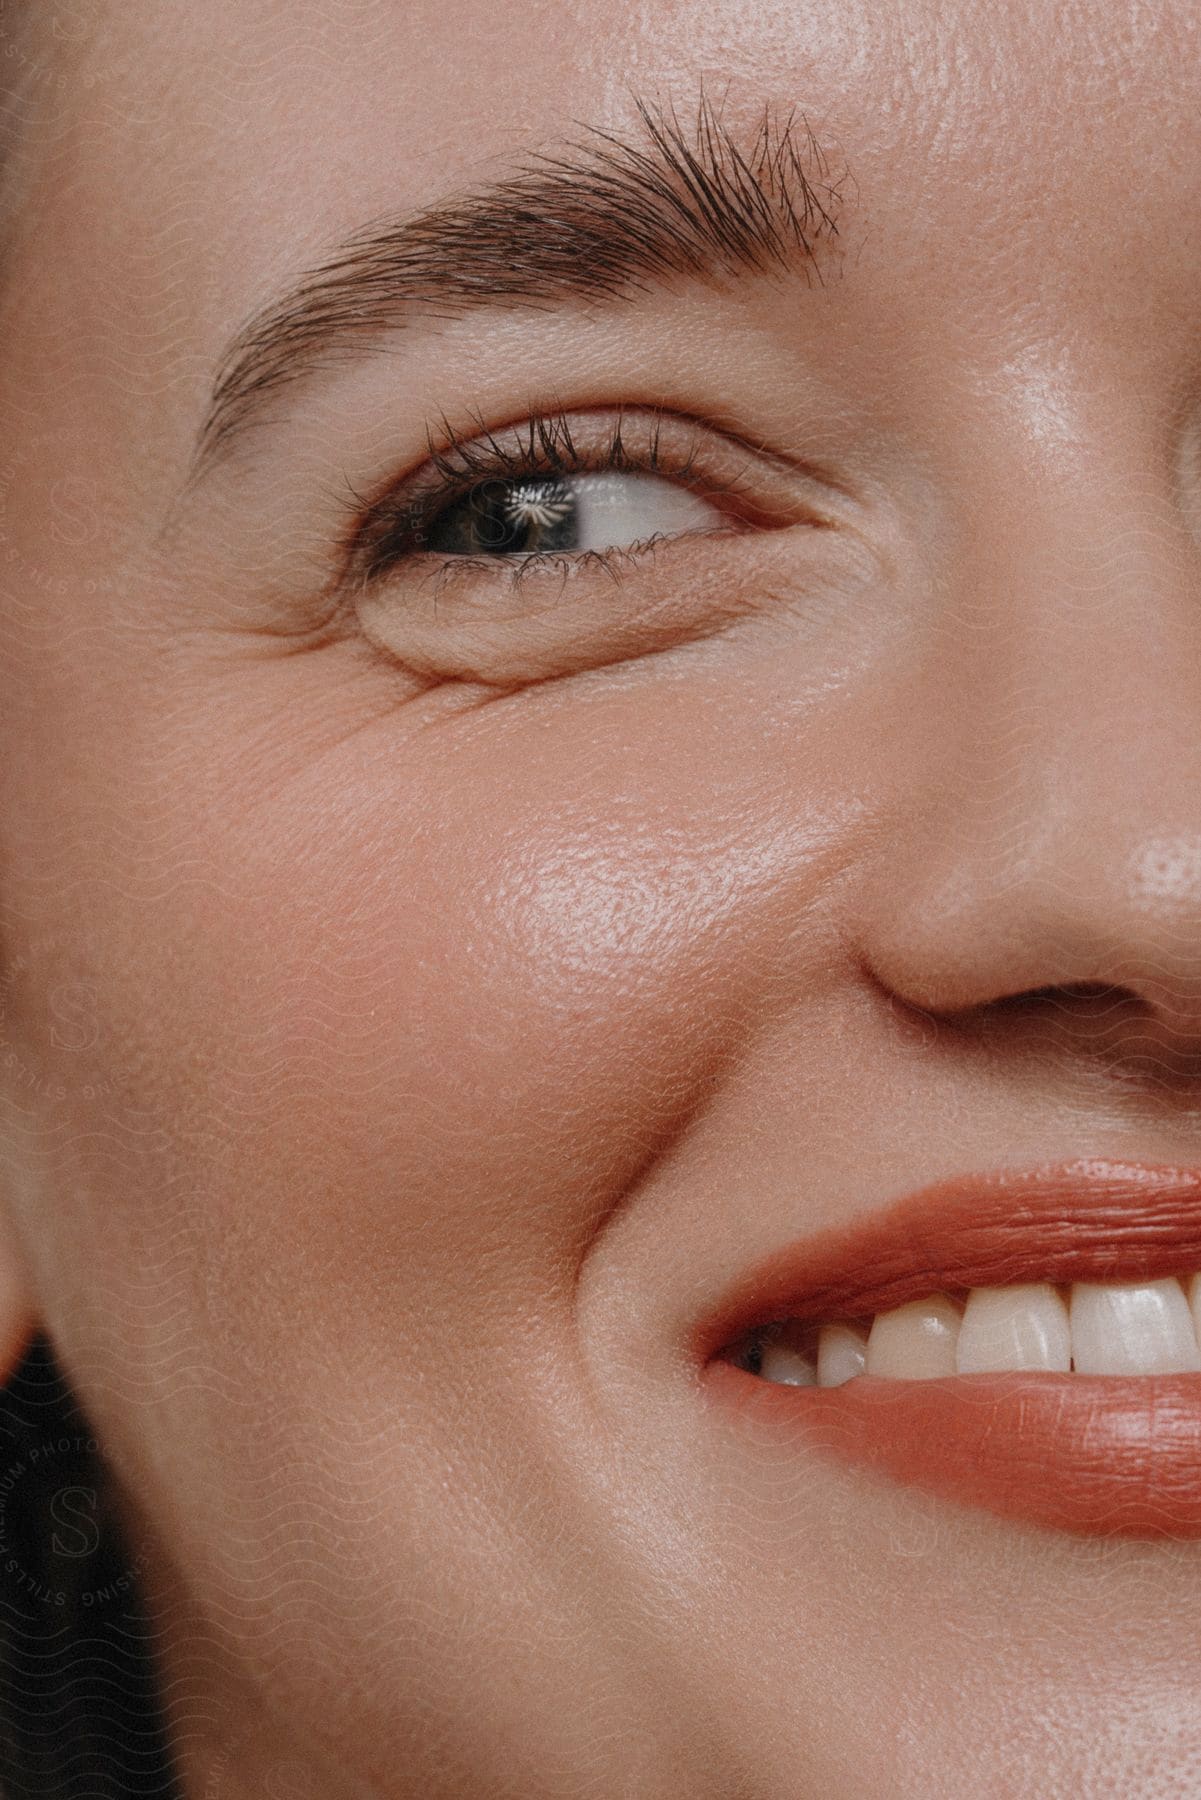 Close-up of a smiling woman's face showing one eye, eyebrow, and her smile, with a clear view of her skin texture.